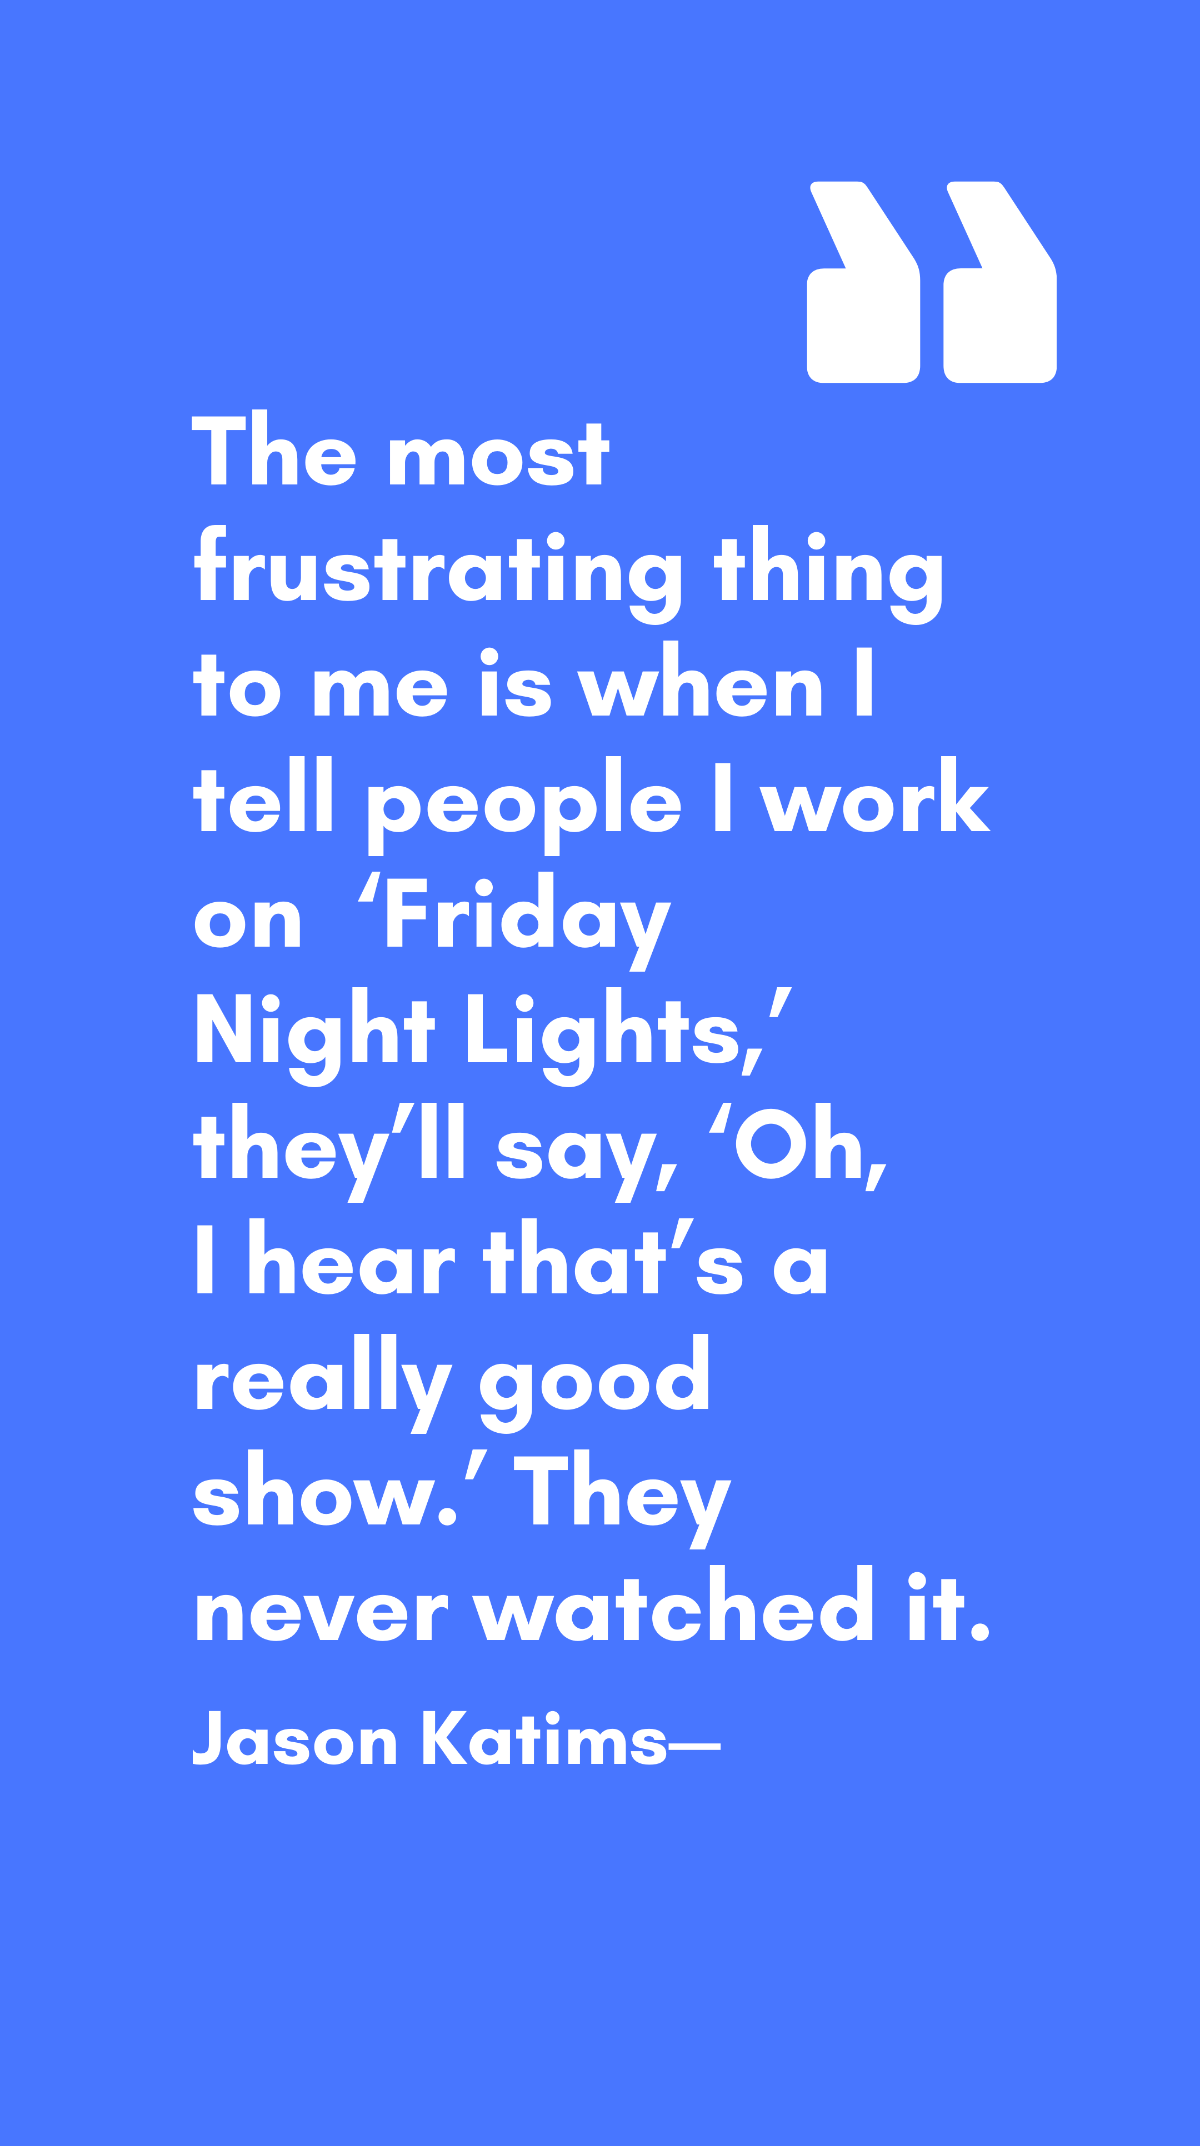 Jason Katims - The most frustrating thing to me is when I tell people I work on ‘Friday Night Lights,’ they’ll say, ‘Oh, I hear that’s a really good show.’ They never watched it.  Template